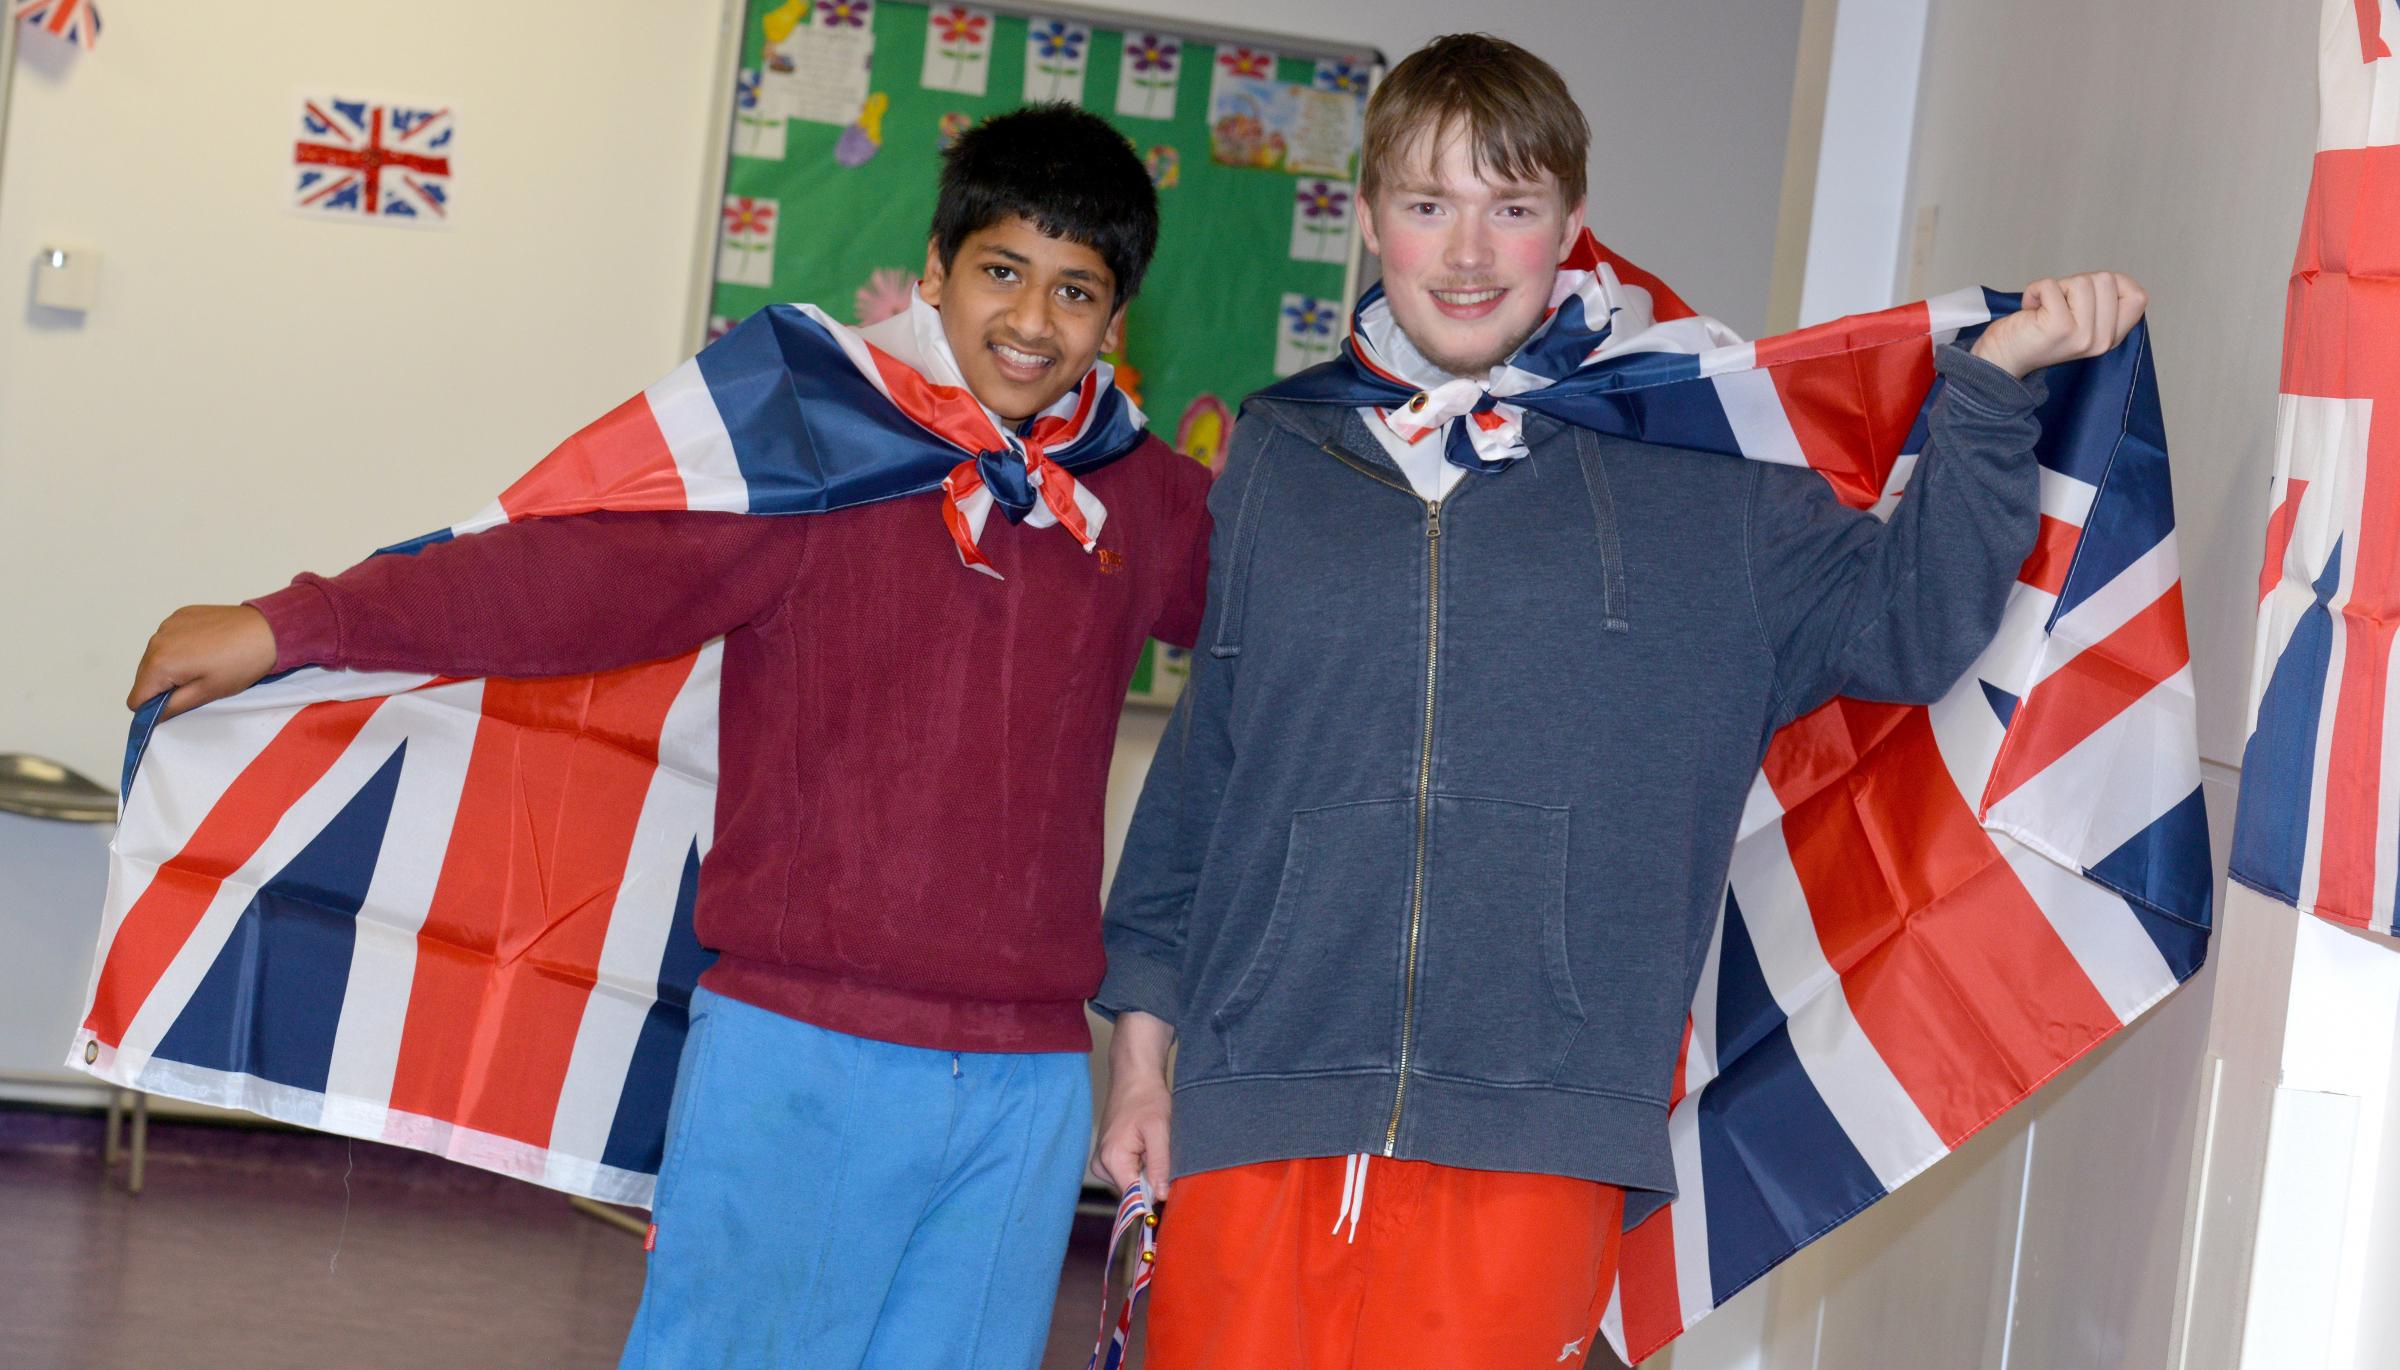 GALLERY: Bradford and district schools unite in special day of patriotism - Bradford Telegraph and Argus